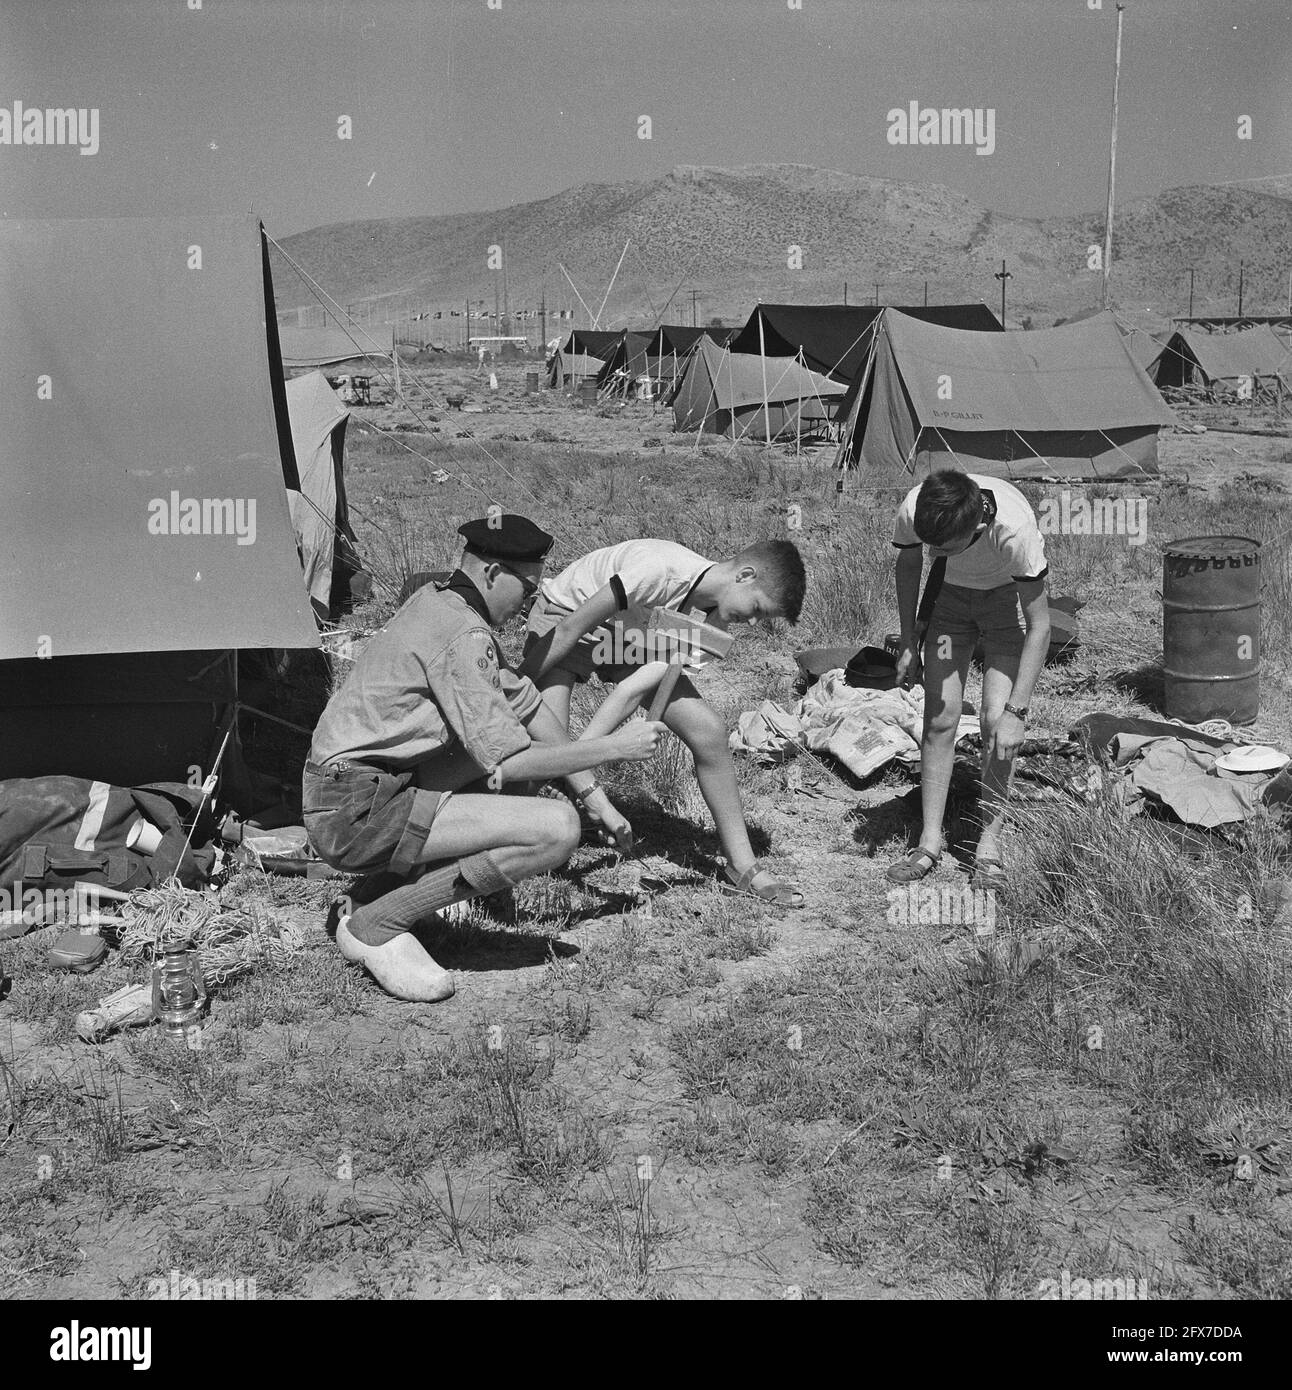 Jamboree 1963 at Marathon Greece. Ad Verhaar from Rotterdam putting up his tent on clogs, August 12 1963, tents, The Netherlands, 20th century press agency photo, news to remember, documentary, historic photography 1945-1990, visual stories, human history of the Twentieth Century, capturing moments in time Stock Photo